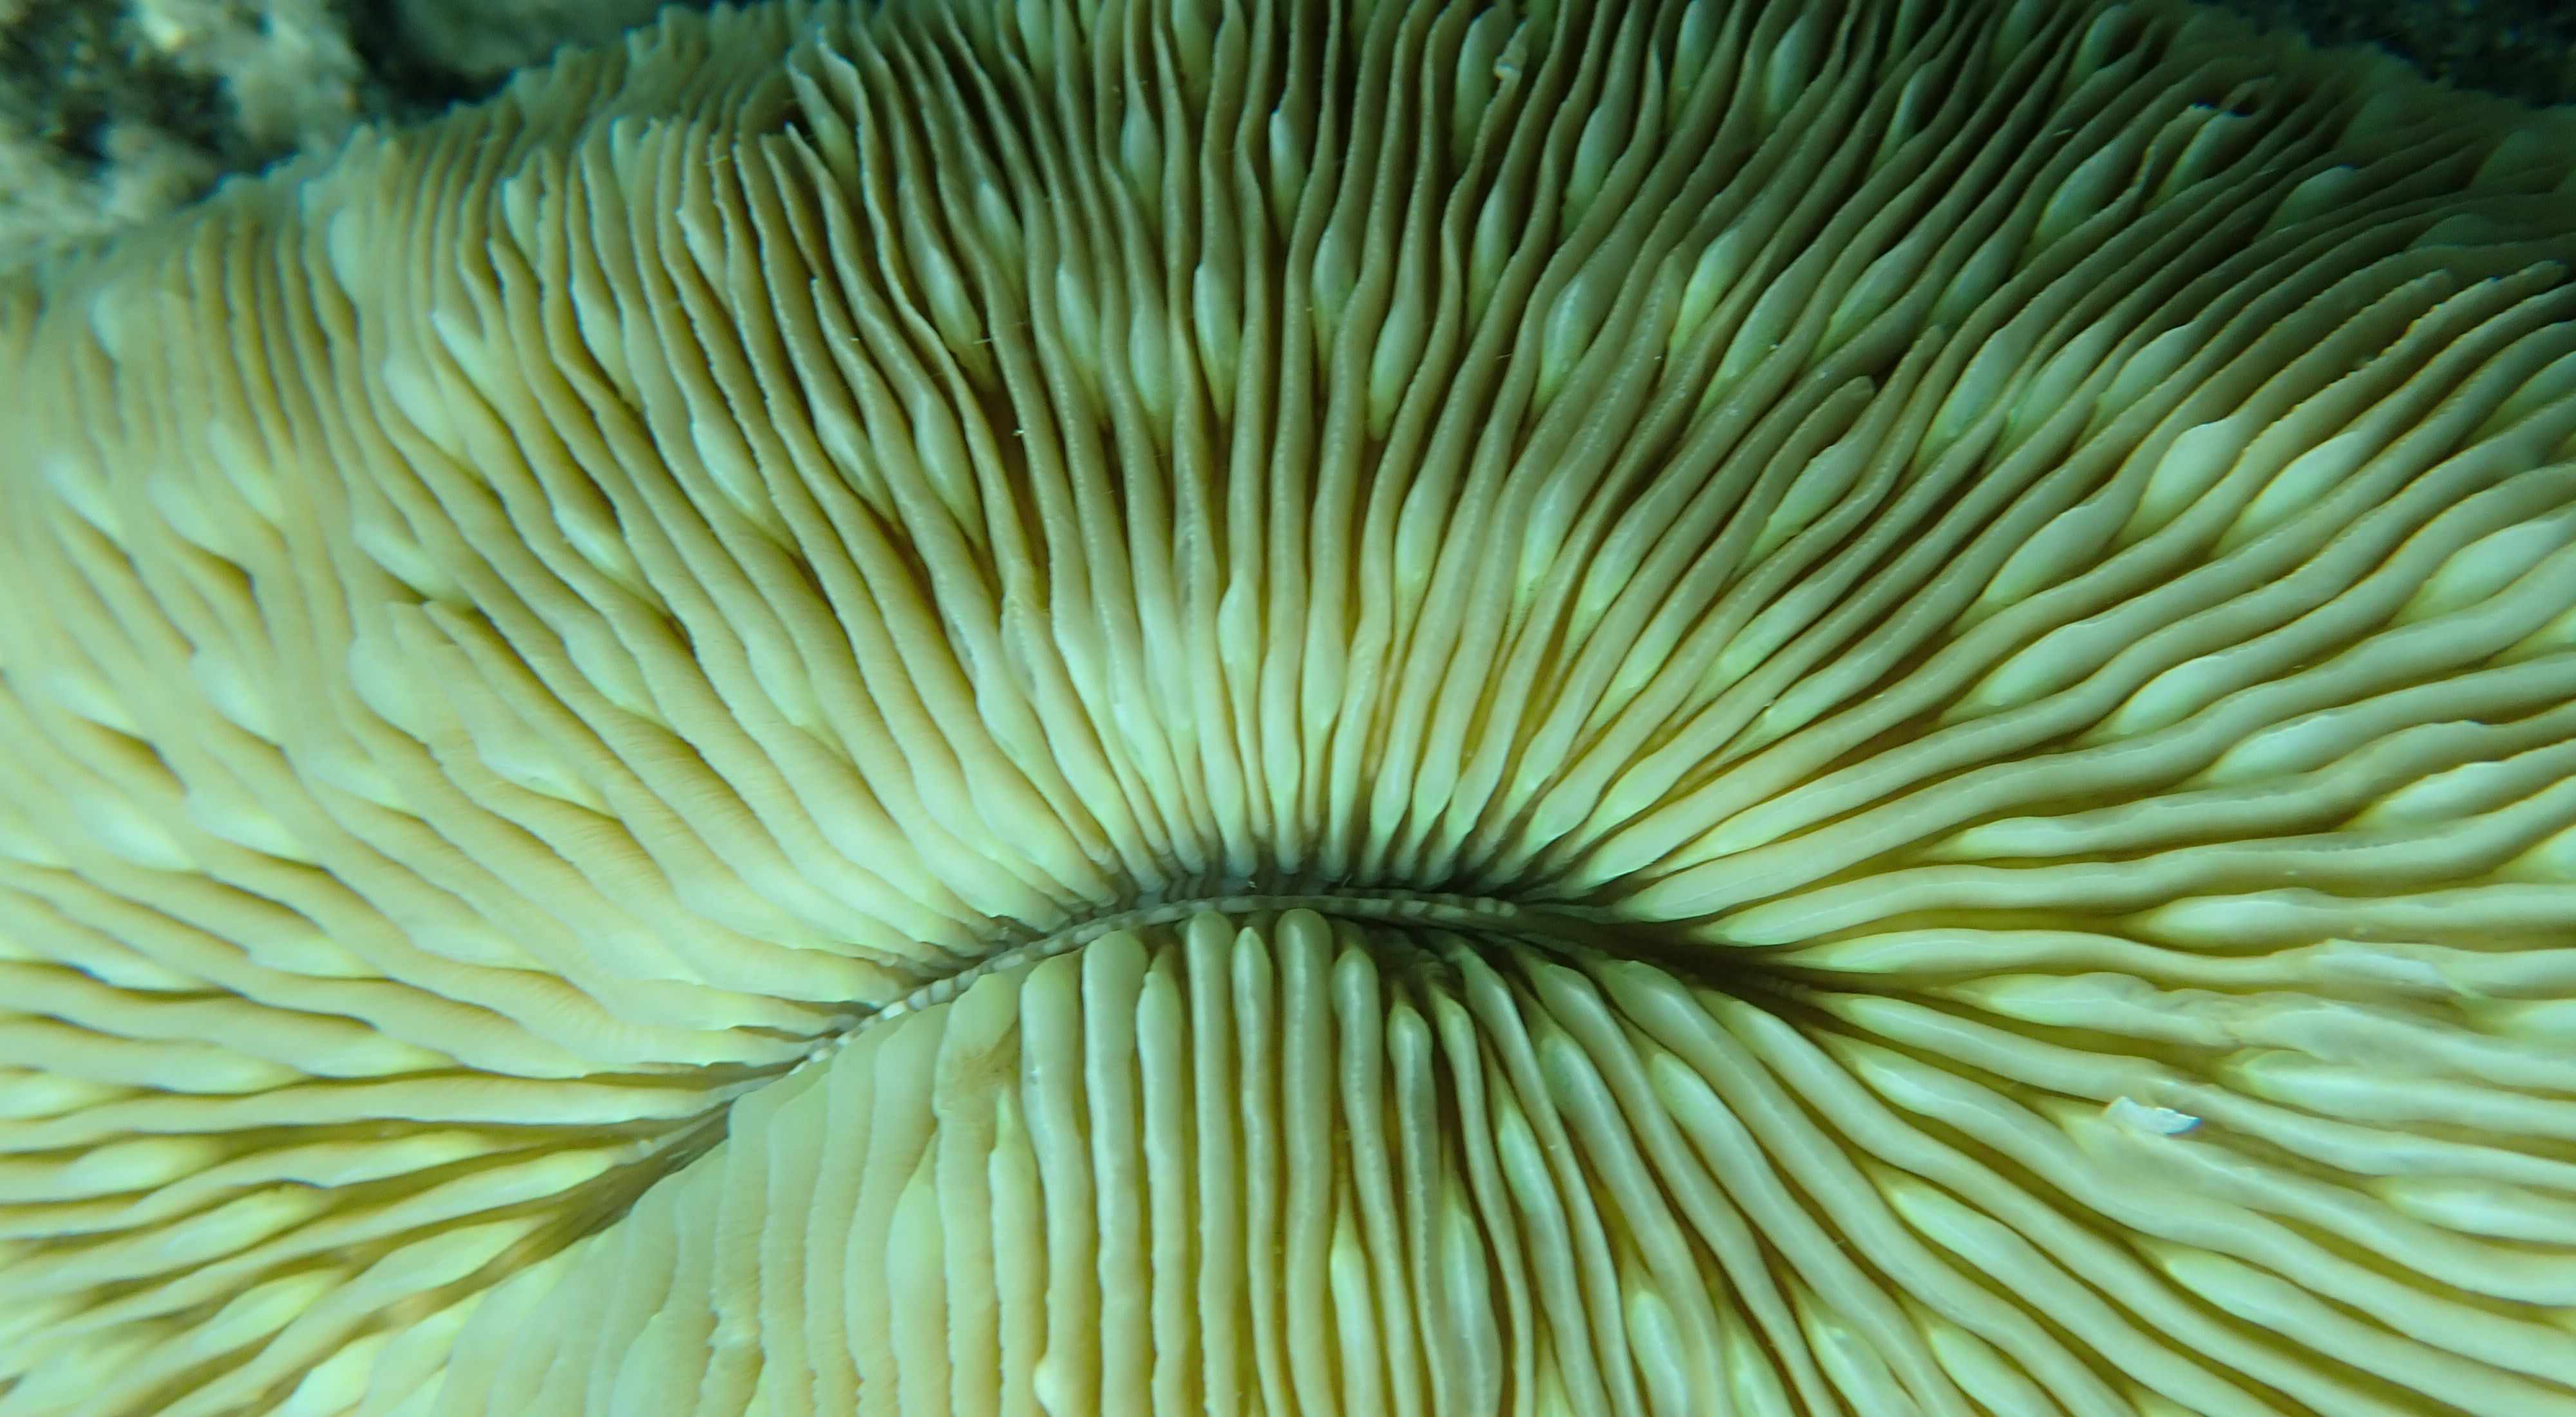 Closeup of a mushroom coral with its many folds and layers.